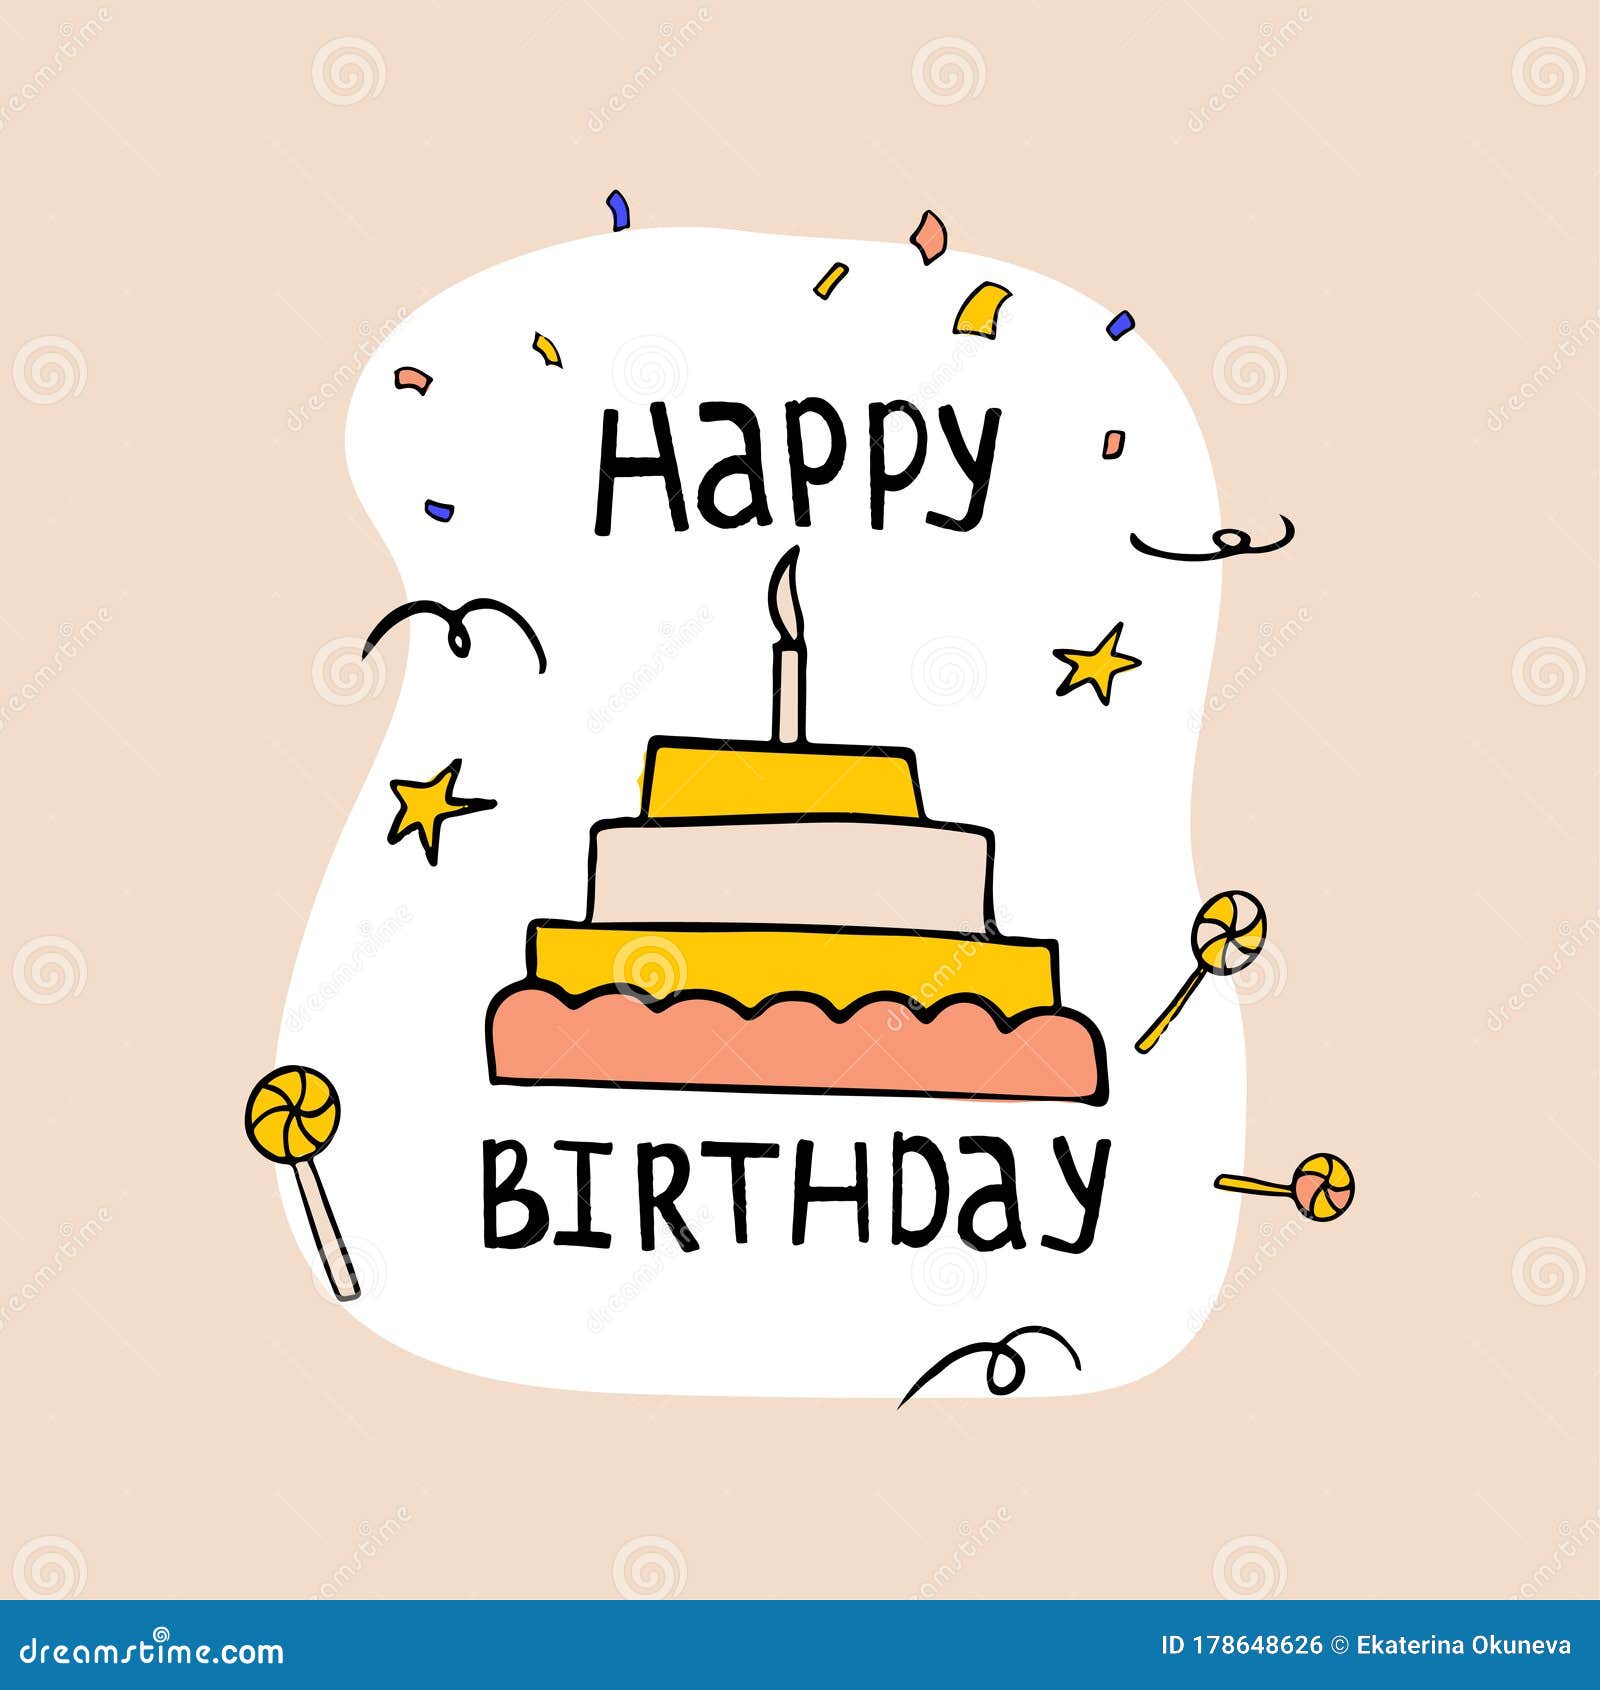 Happy Birthday Invitation Card Template. Hand Drawn Lettering and Cake with  a Birthday Candle Stock Illustration - Illustration of funny, candle:  178648626